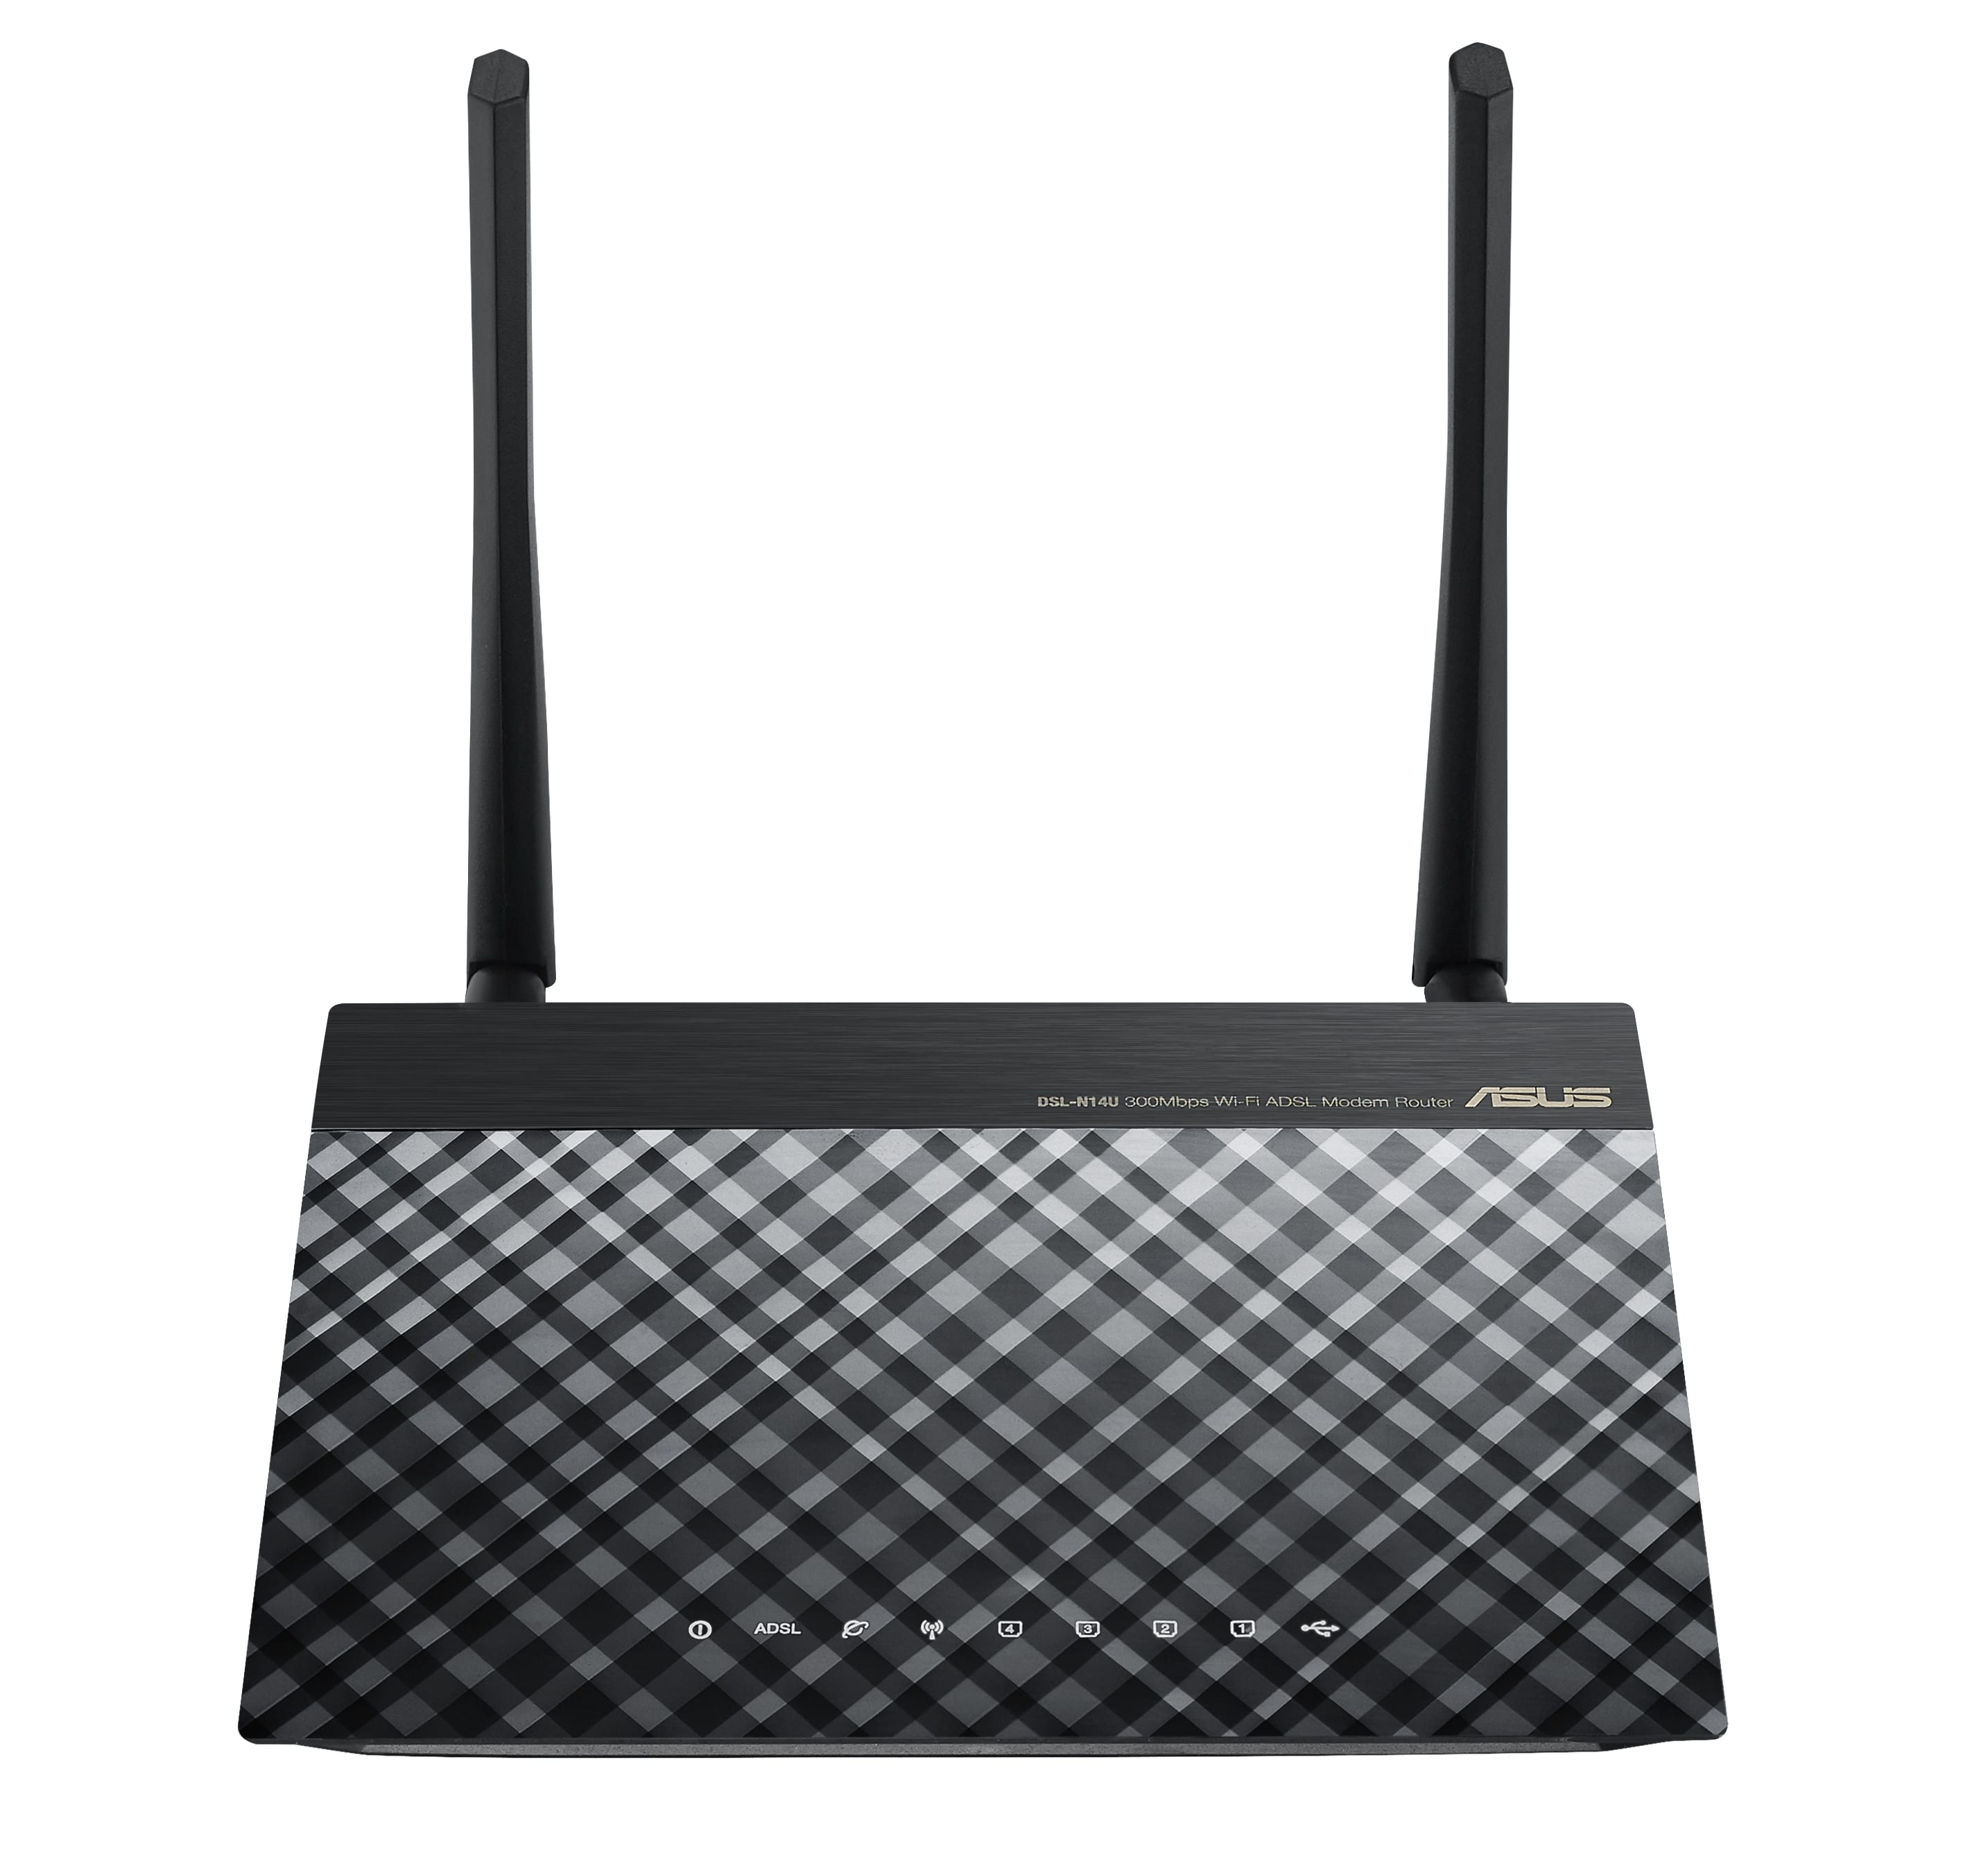 ASUS N14 ADSL Modem Router (N300) for sale with Makro Outlet and bidorbuy